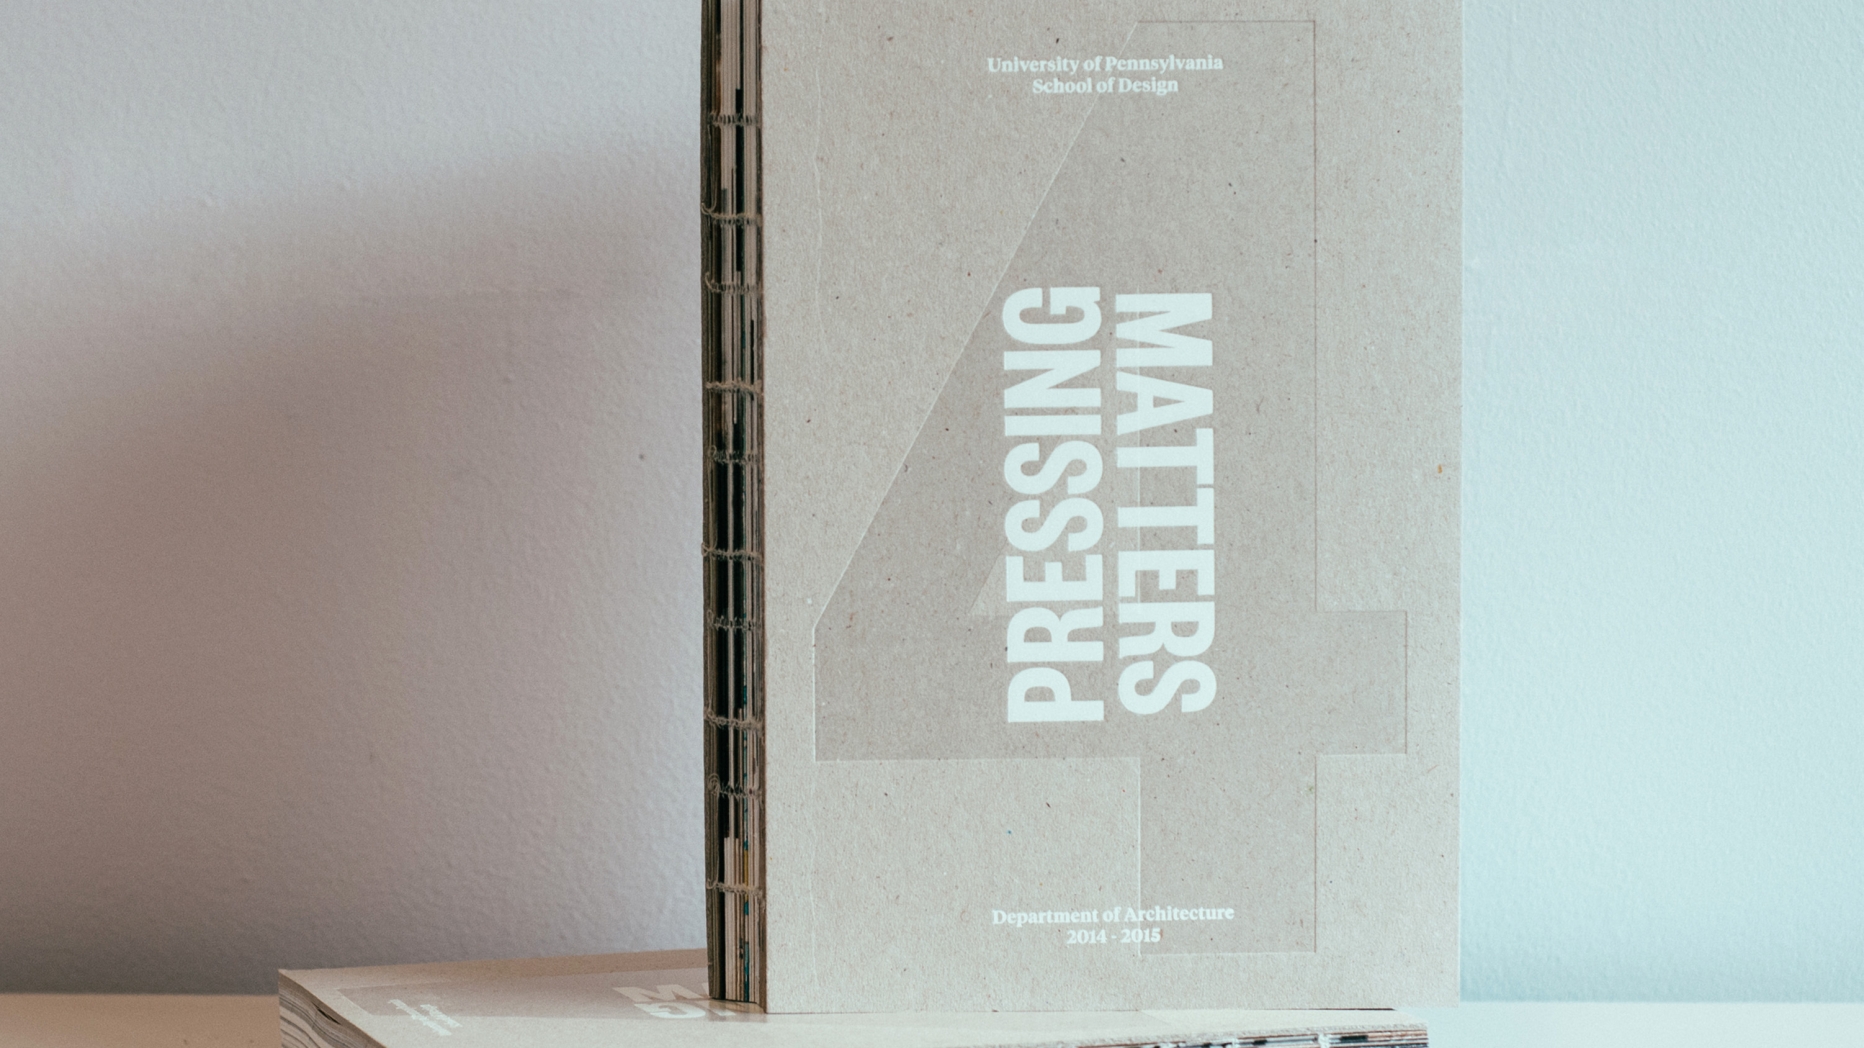 Two copies of pressing matters 4